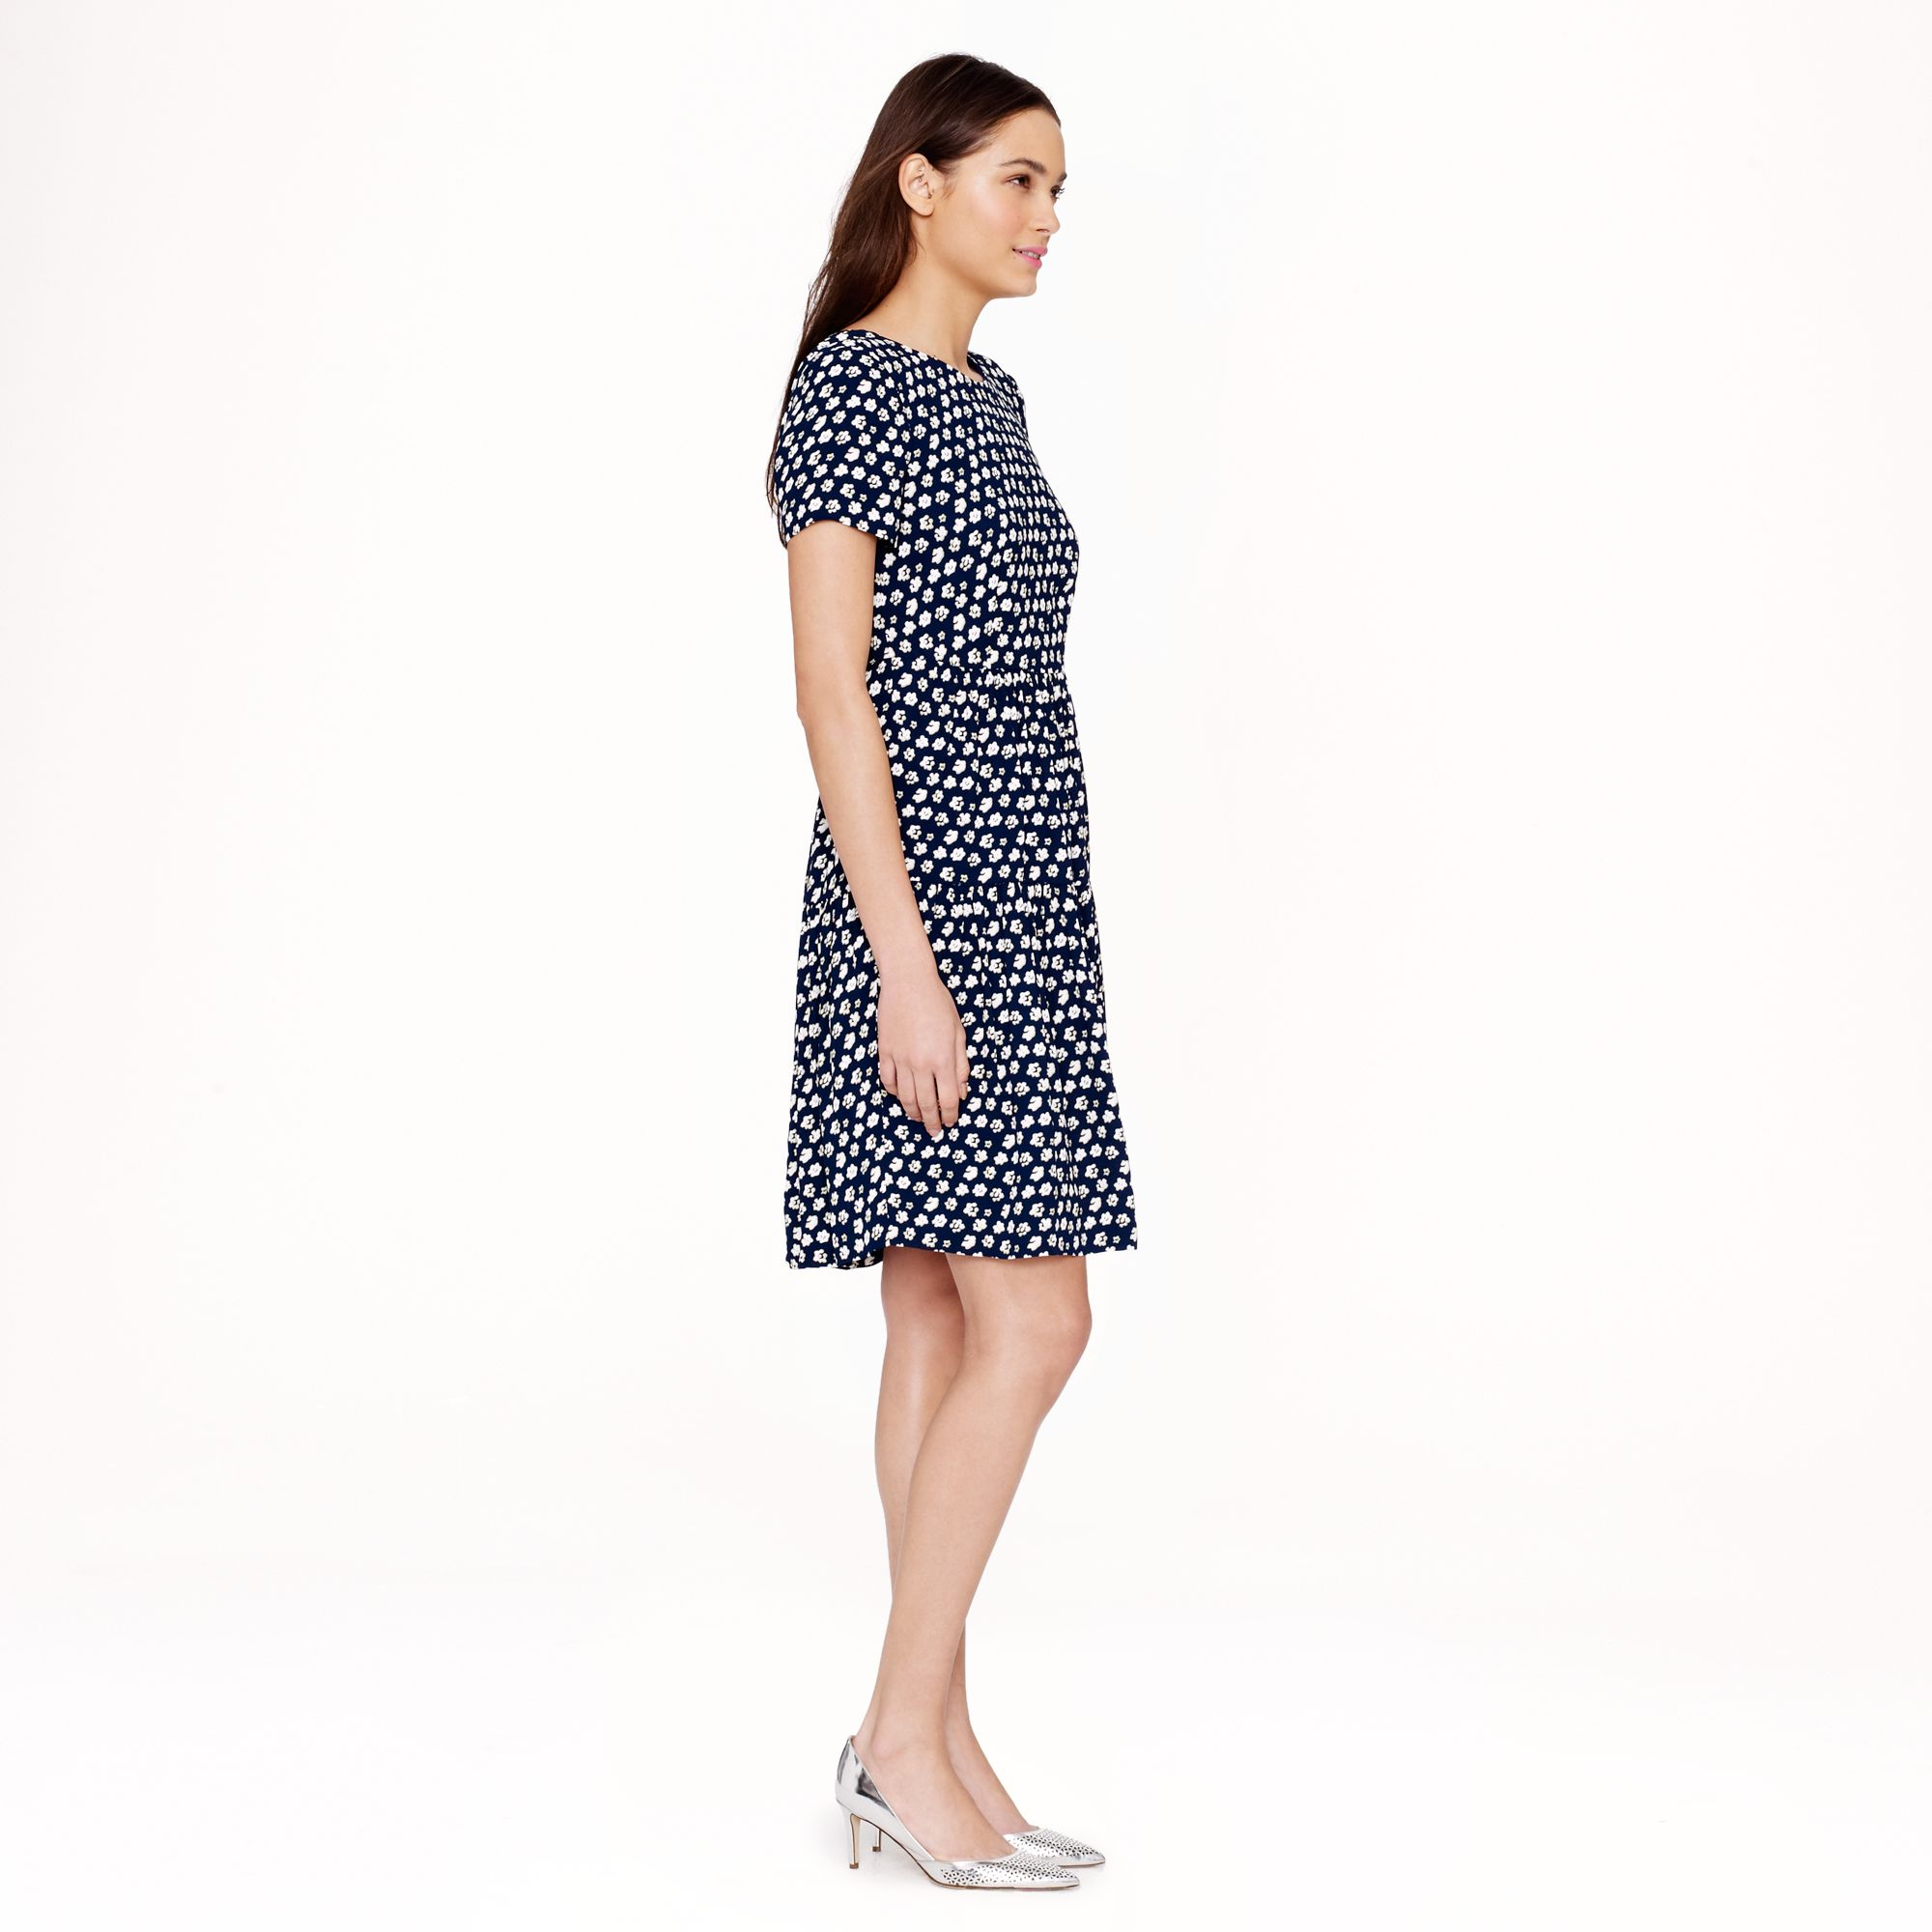 Lyst - J.Crew Tiered Dress in Blurred Floral in Blue